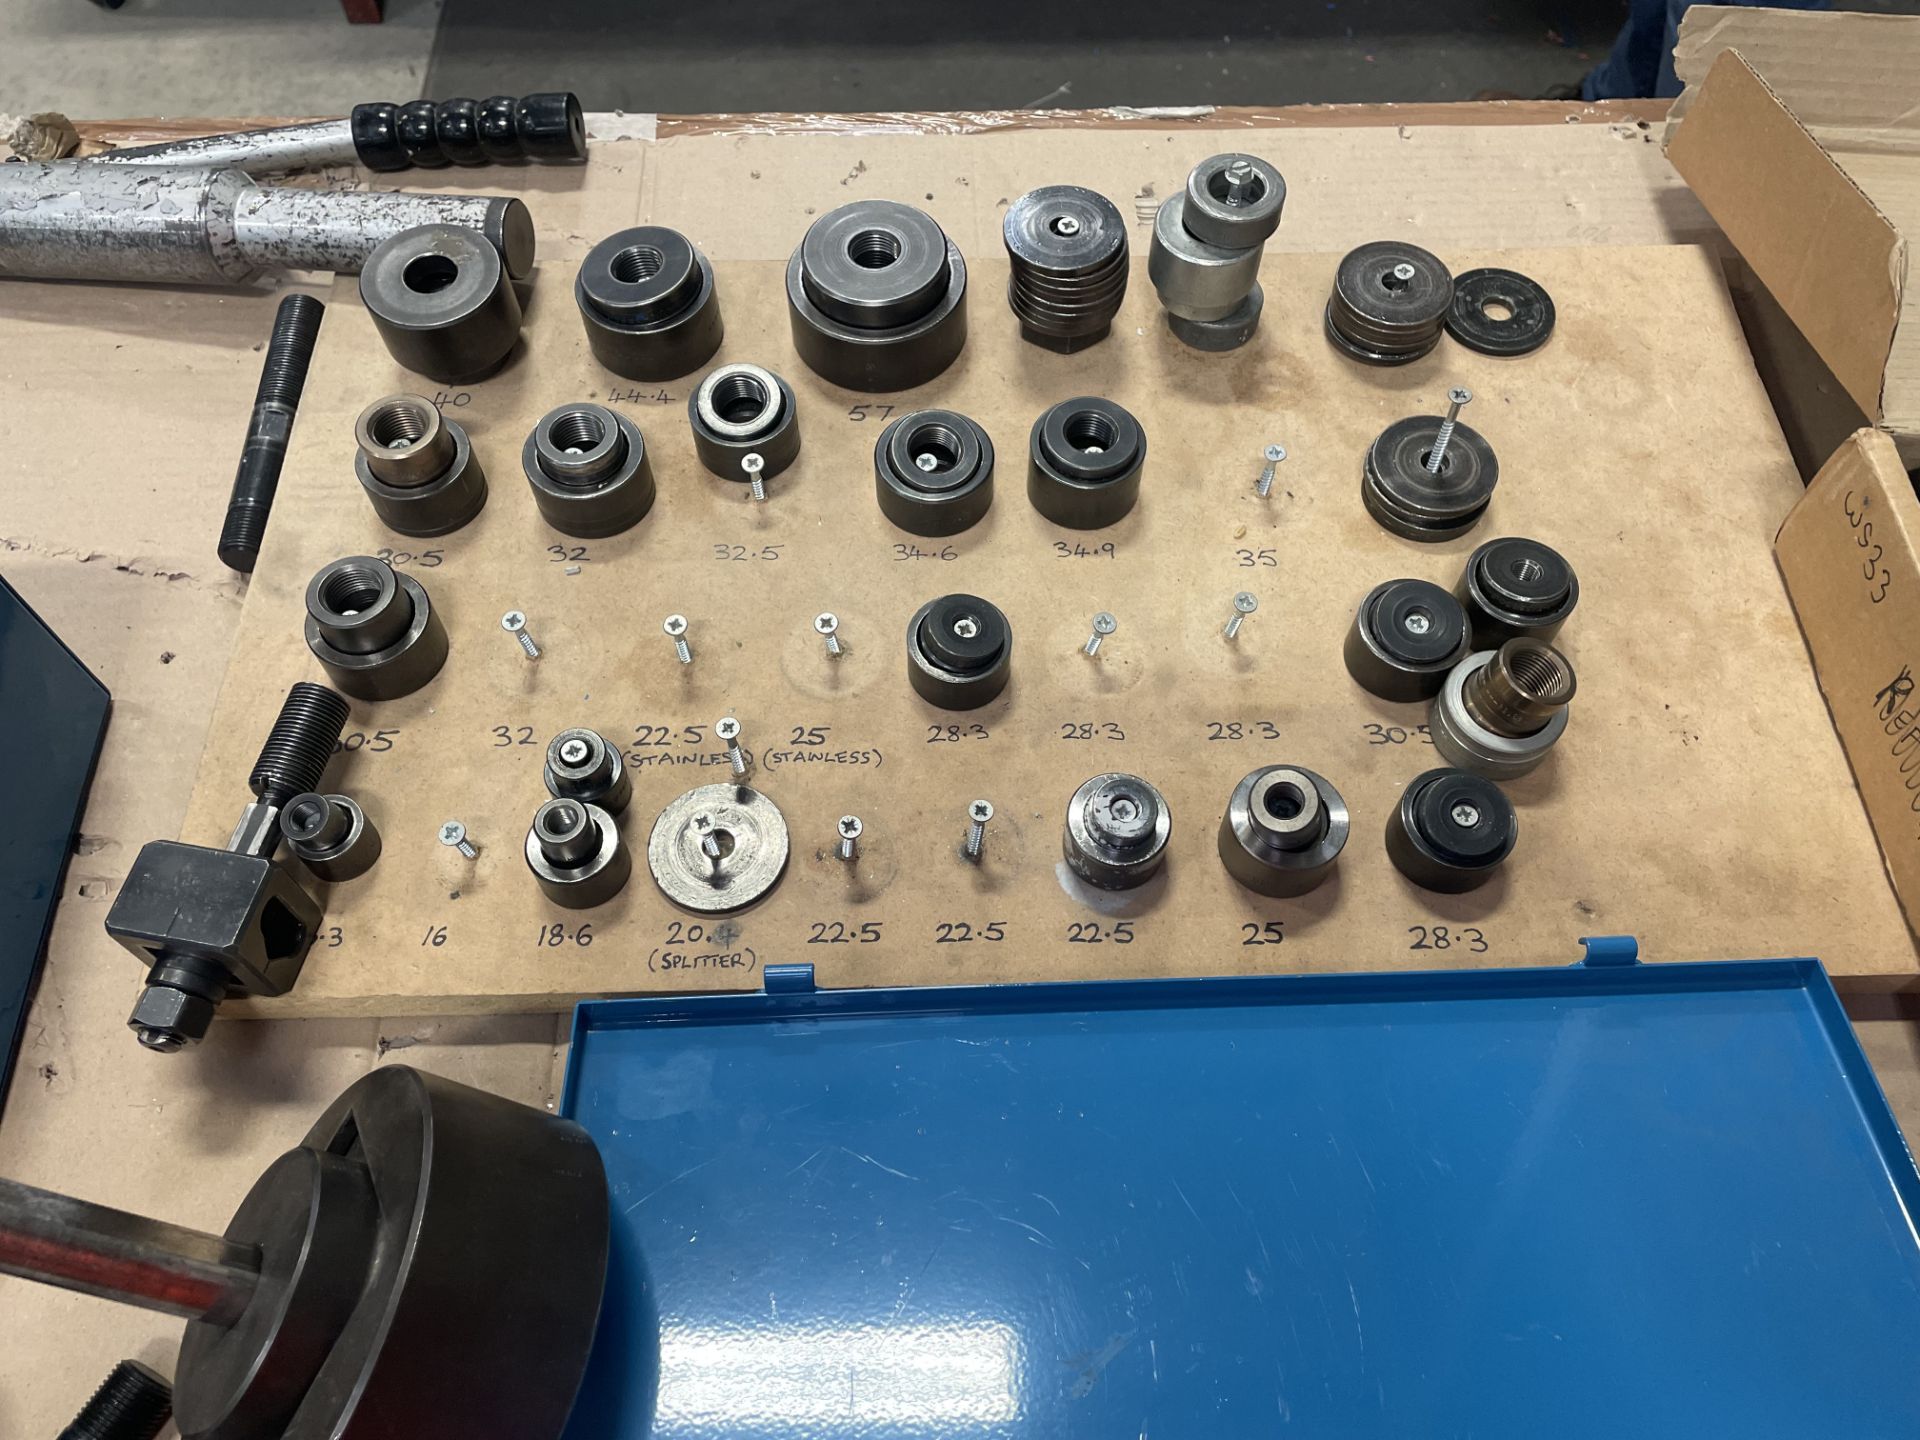 Rivet Inserters & Hole Punching Systems, with tooling as set out on benchPlease read the following - Image 2 of 5